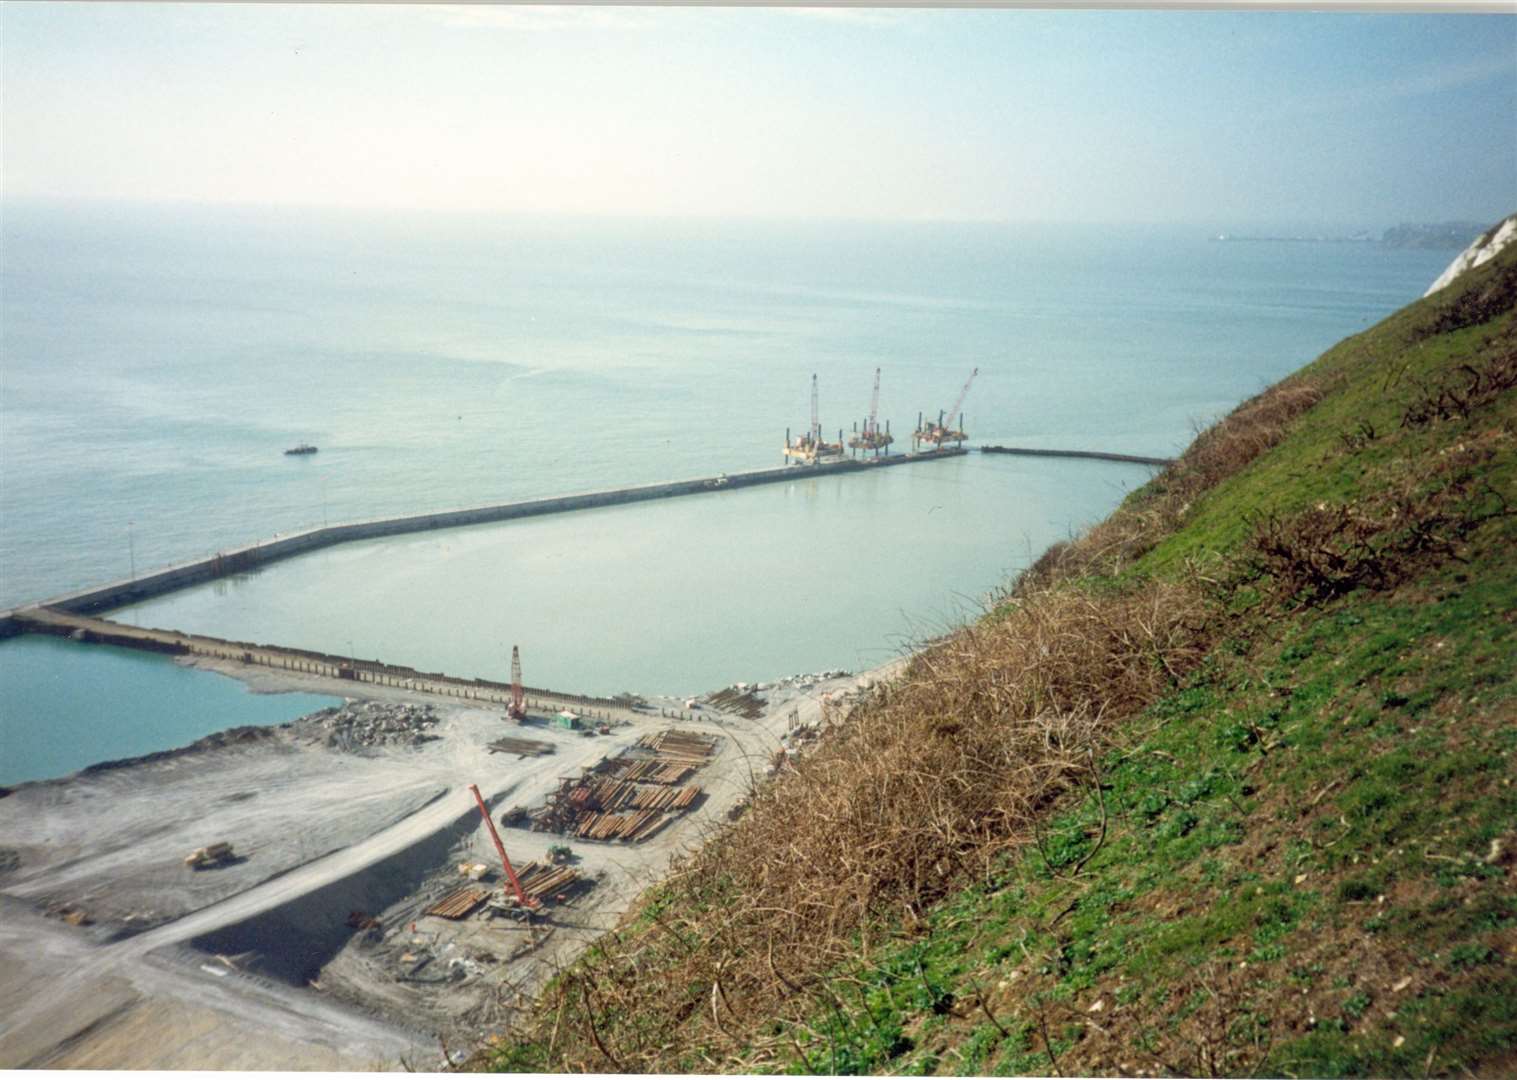 Work on the Channel Tunnel site in 1988, showing the lagoons to be filled with excavated spoil to create Samphire Hoe